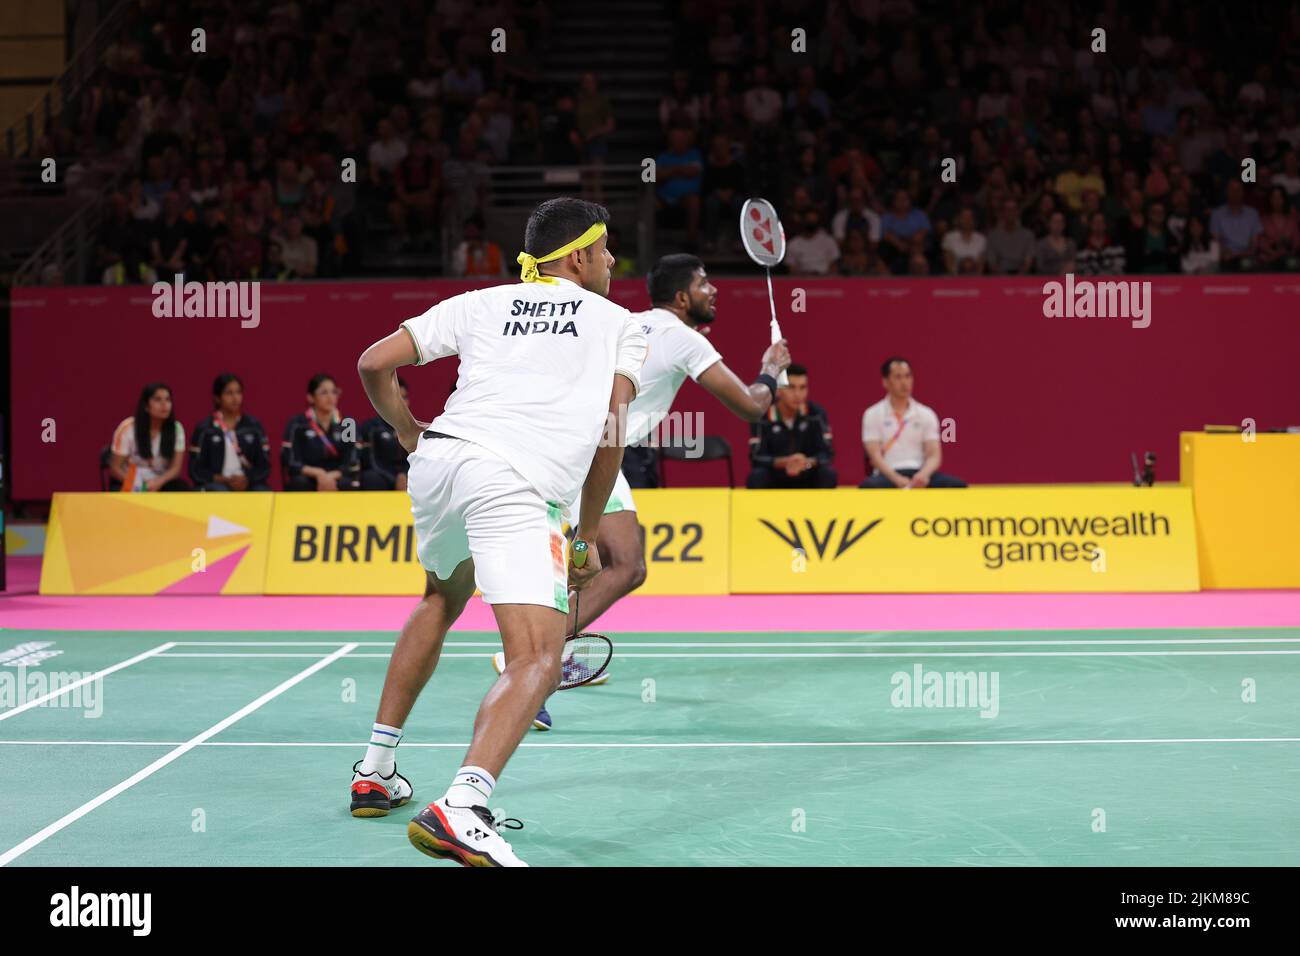 Birmingham, UK, 1st Aug 2022; Common Wealth Games; CWG 2022 Badminton Rankings Reddy and Shetty playing against Malaysia 